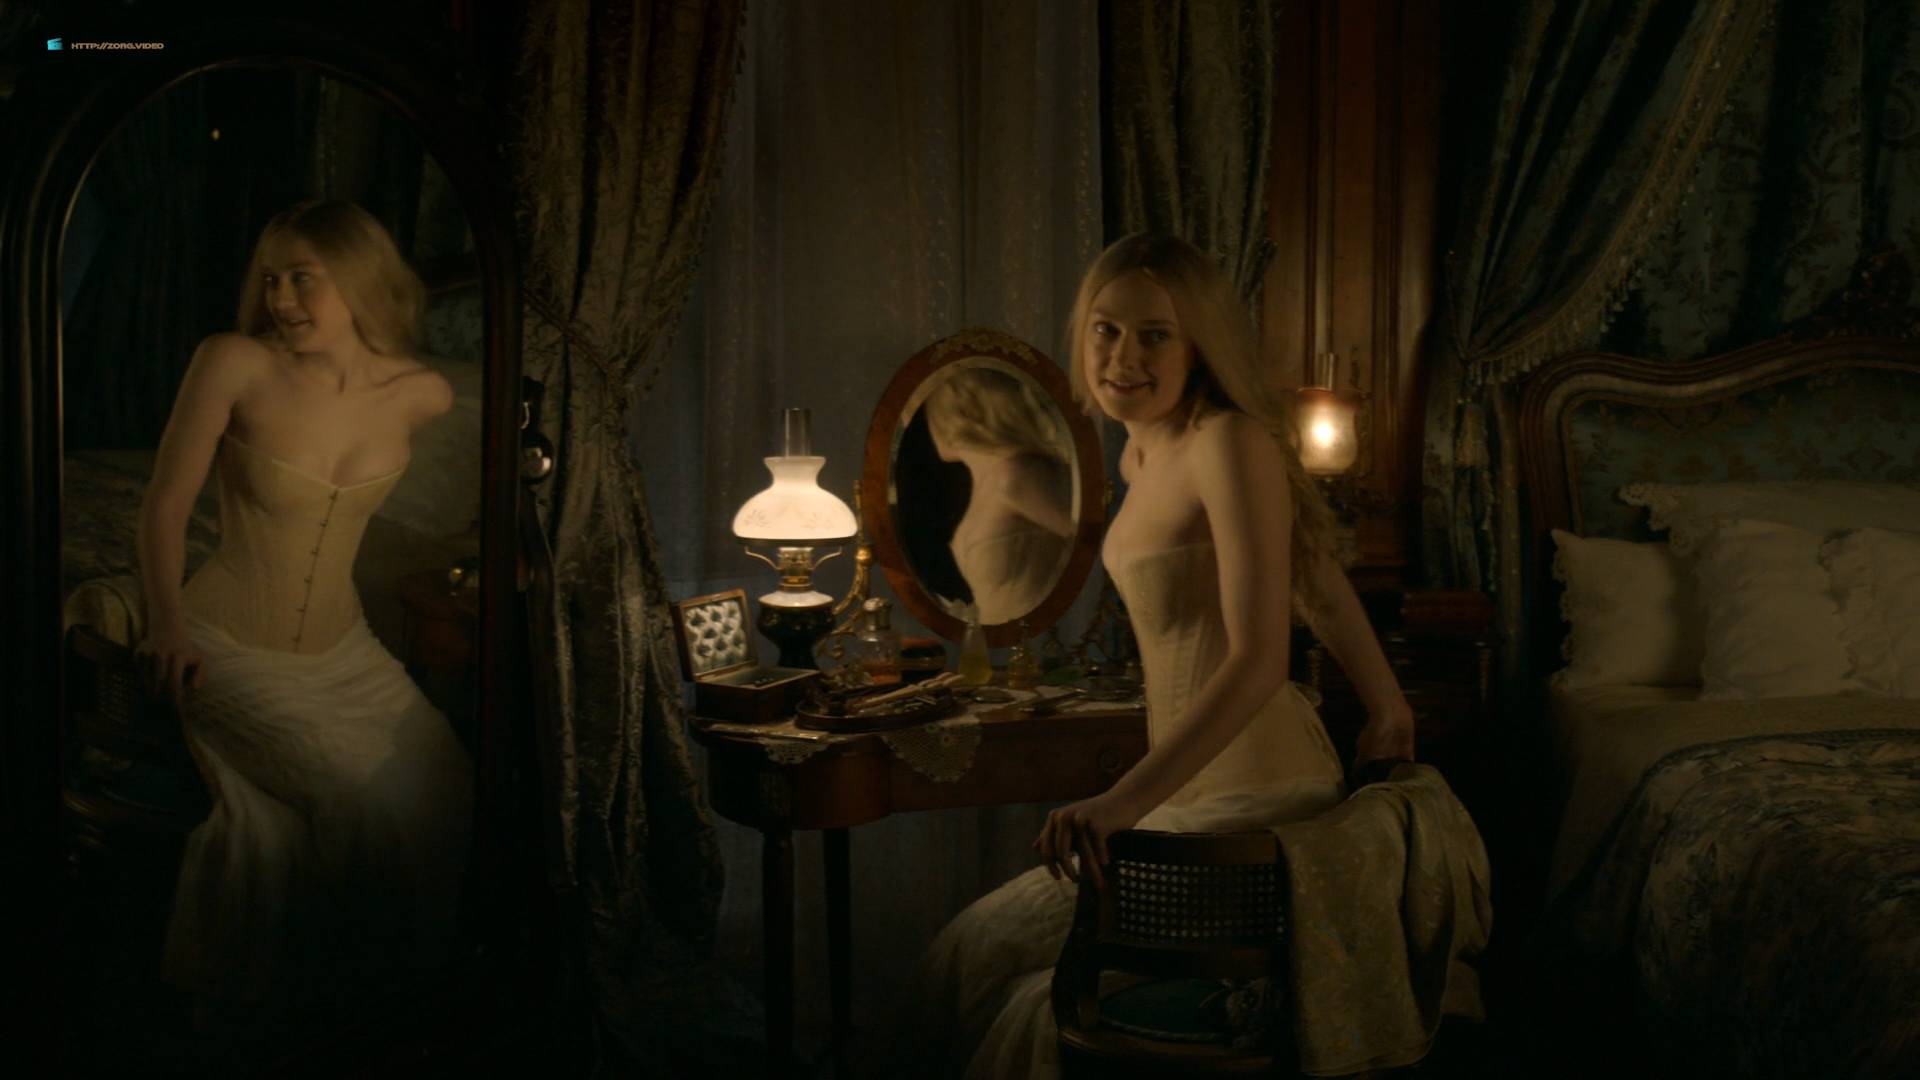 Dakota-Fanning-hot-cleavage-and-Daisy-Bevan-sex-The-Alienist-2018-s1e2-HD-1...